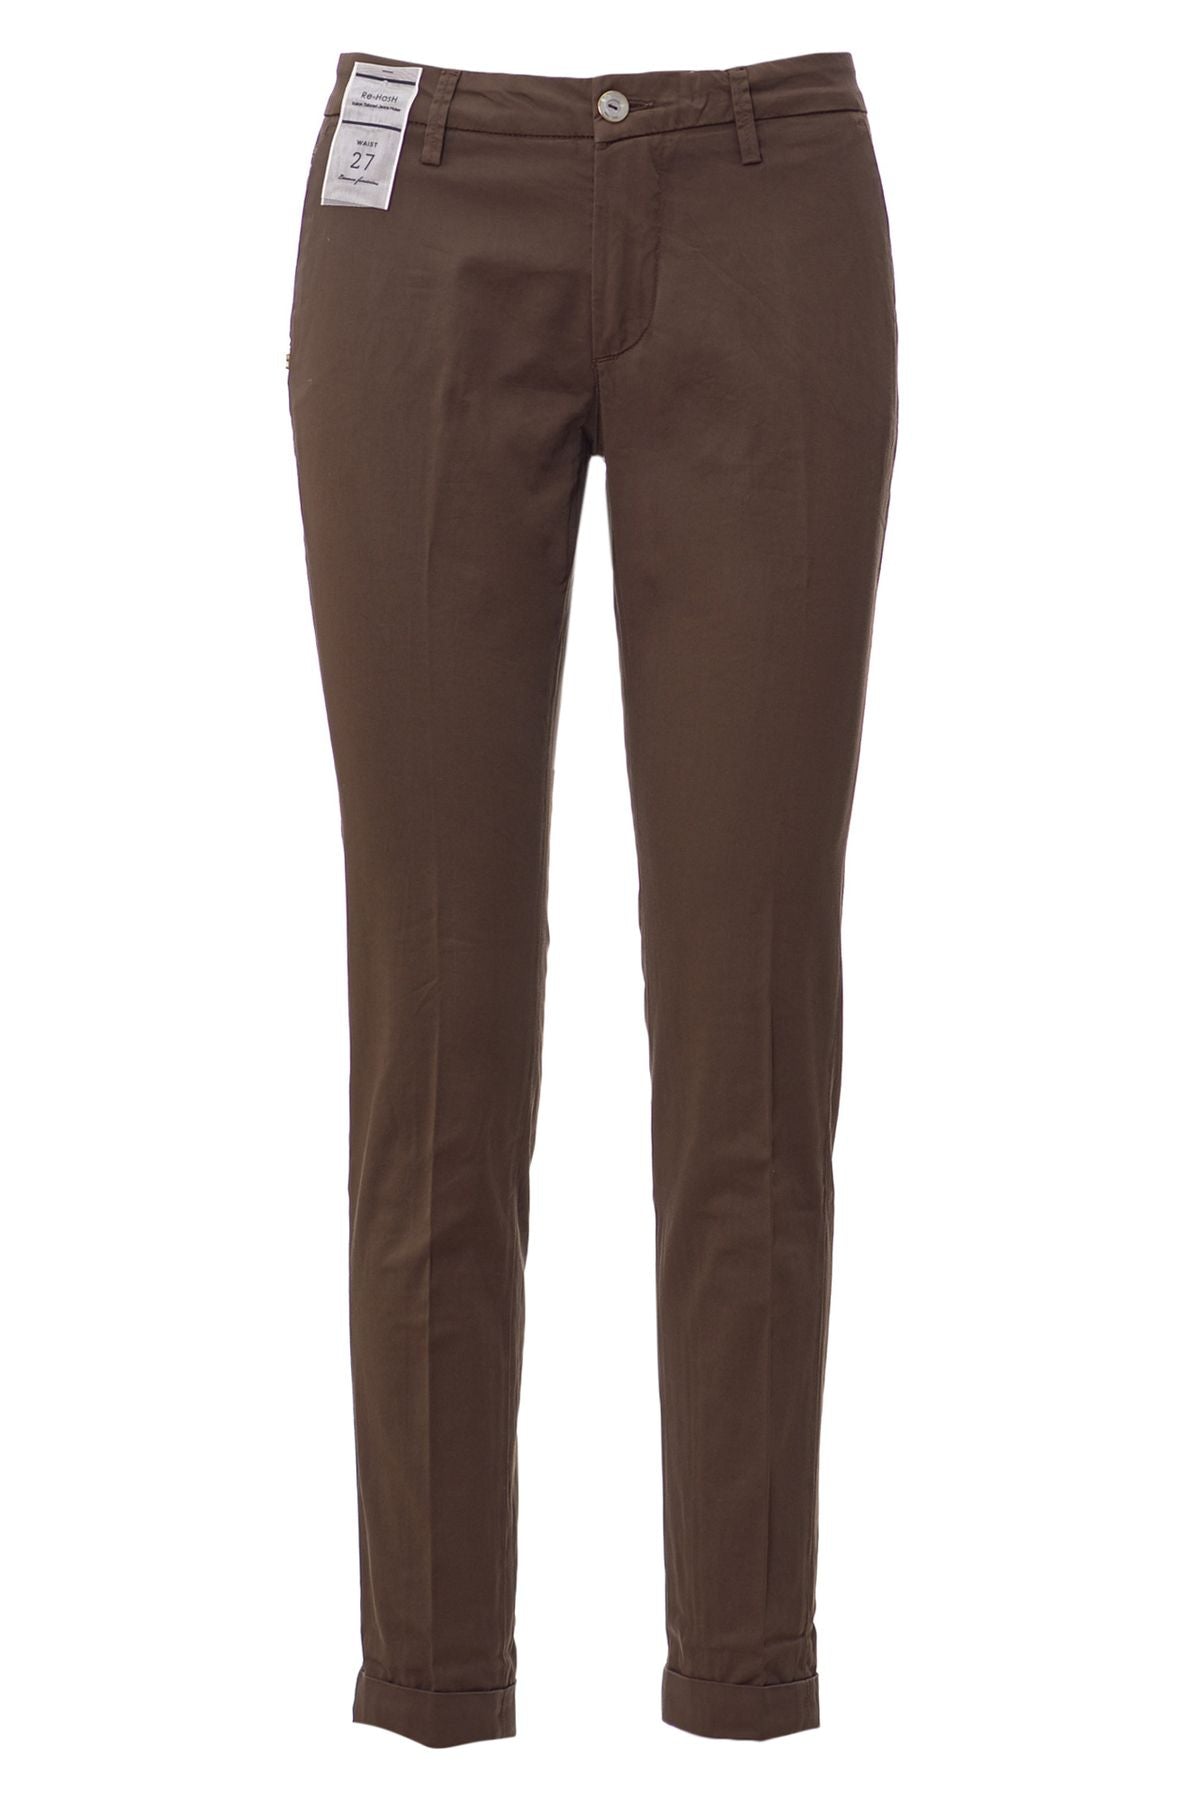 Re-HasH Spring/Summer Cotton Trousers